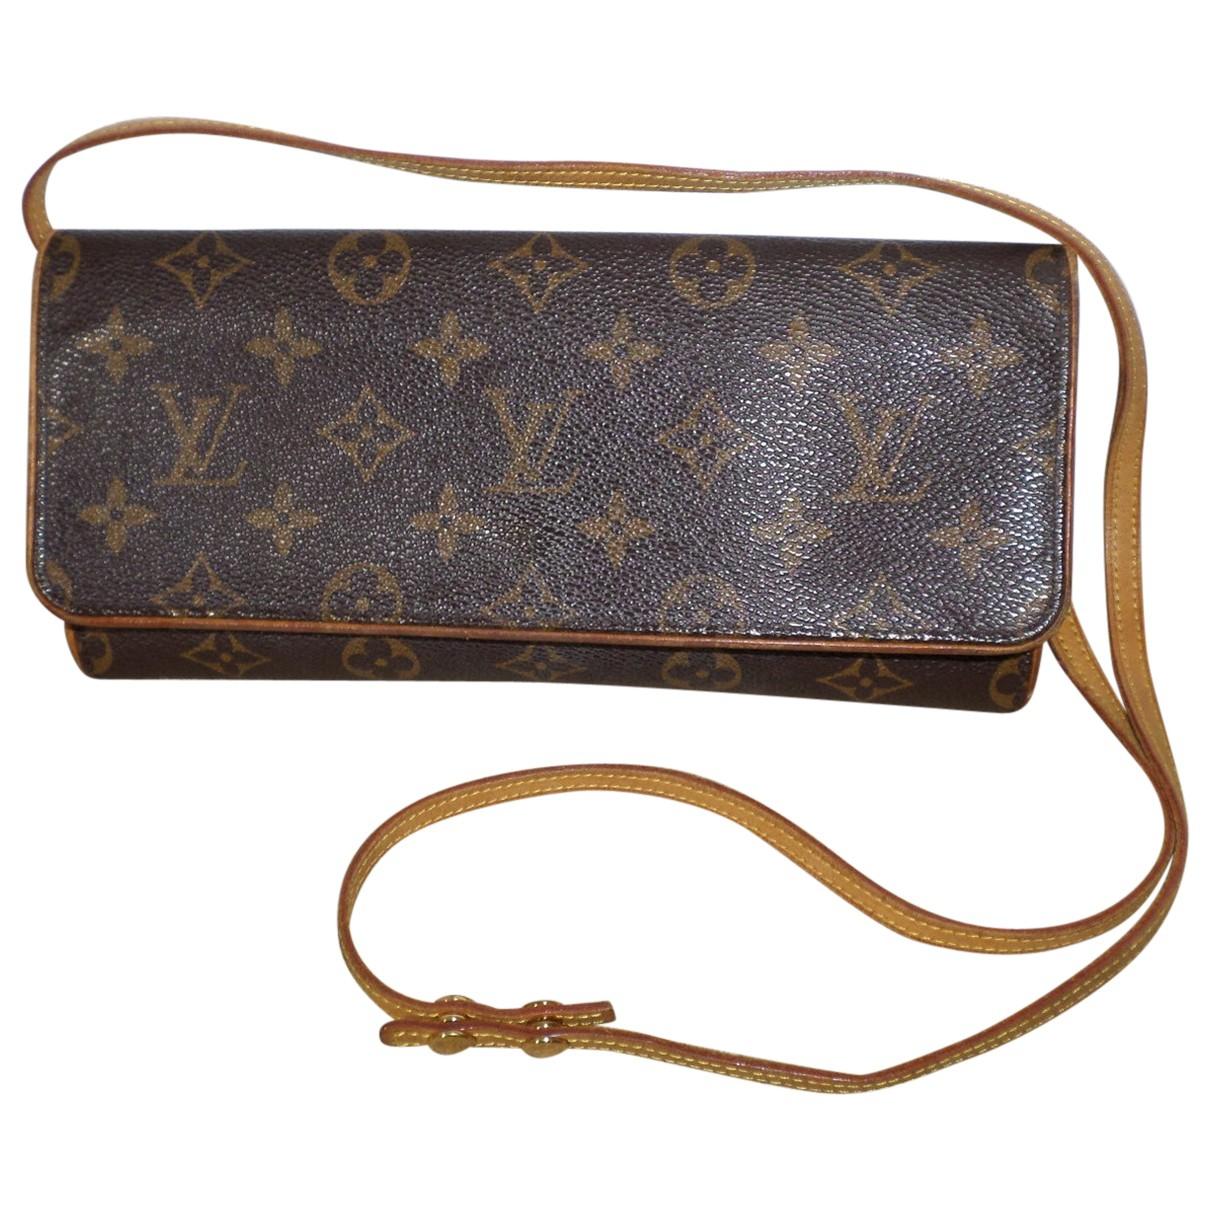 Lyst - Louis Vuitton Pre-owned Cloth Crossbody Bag in Brown